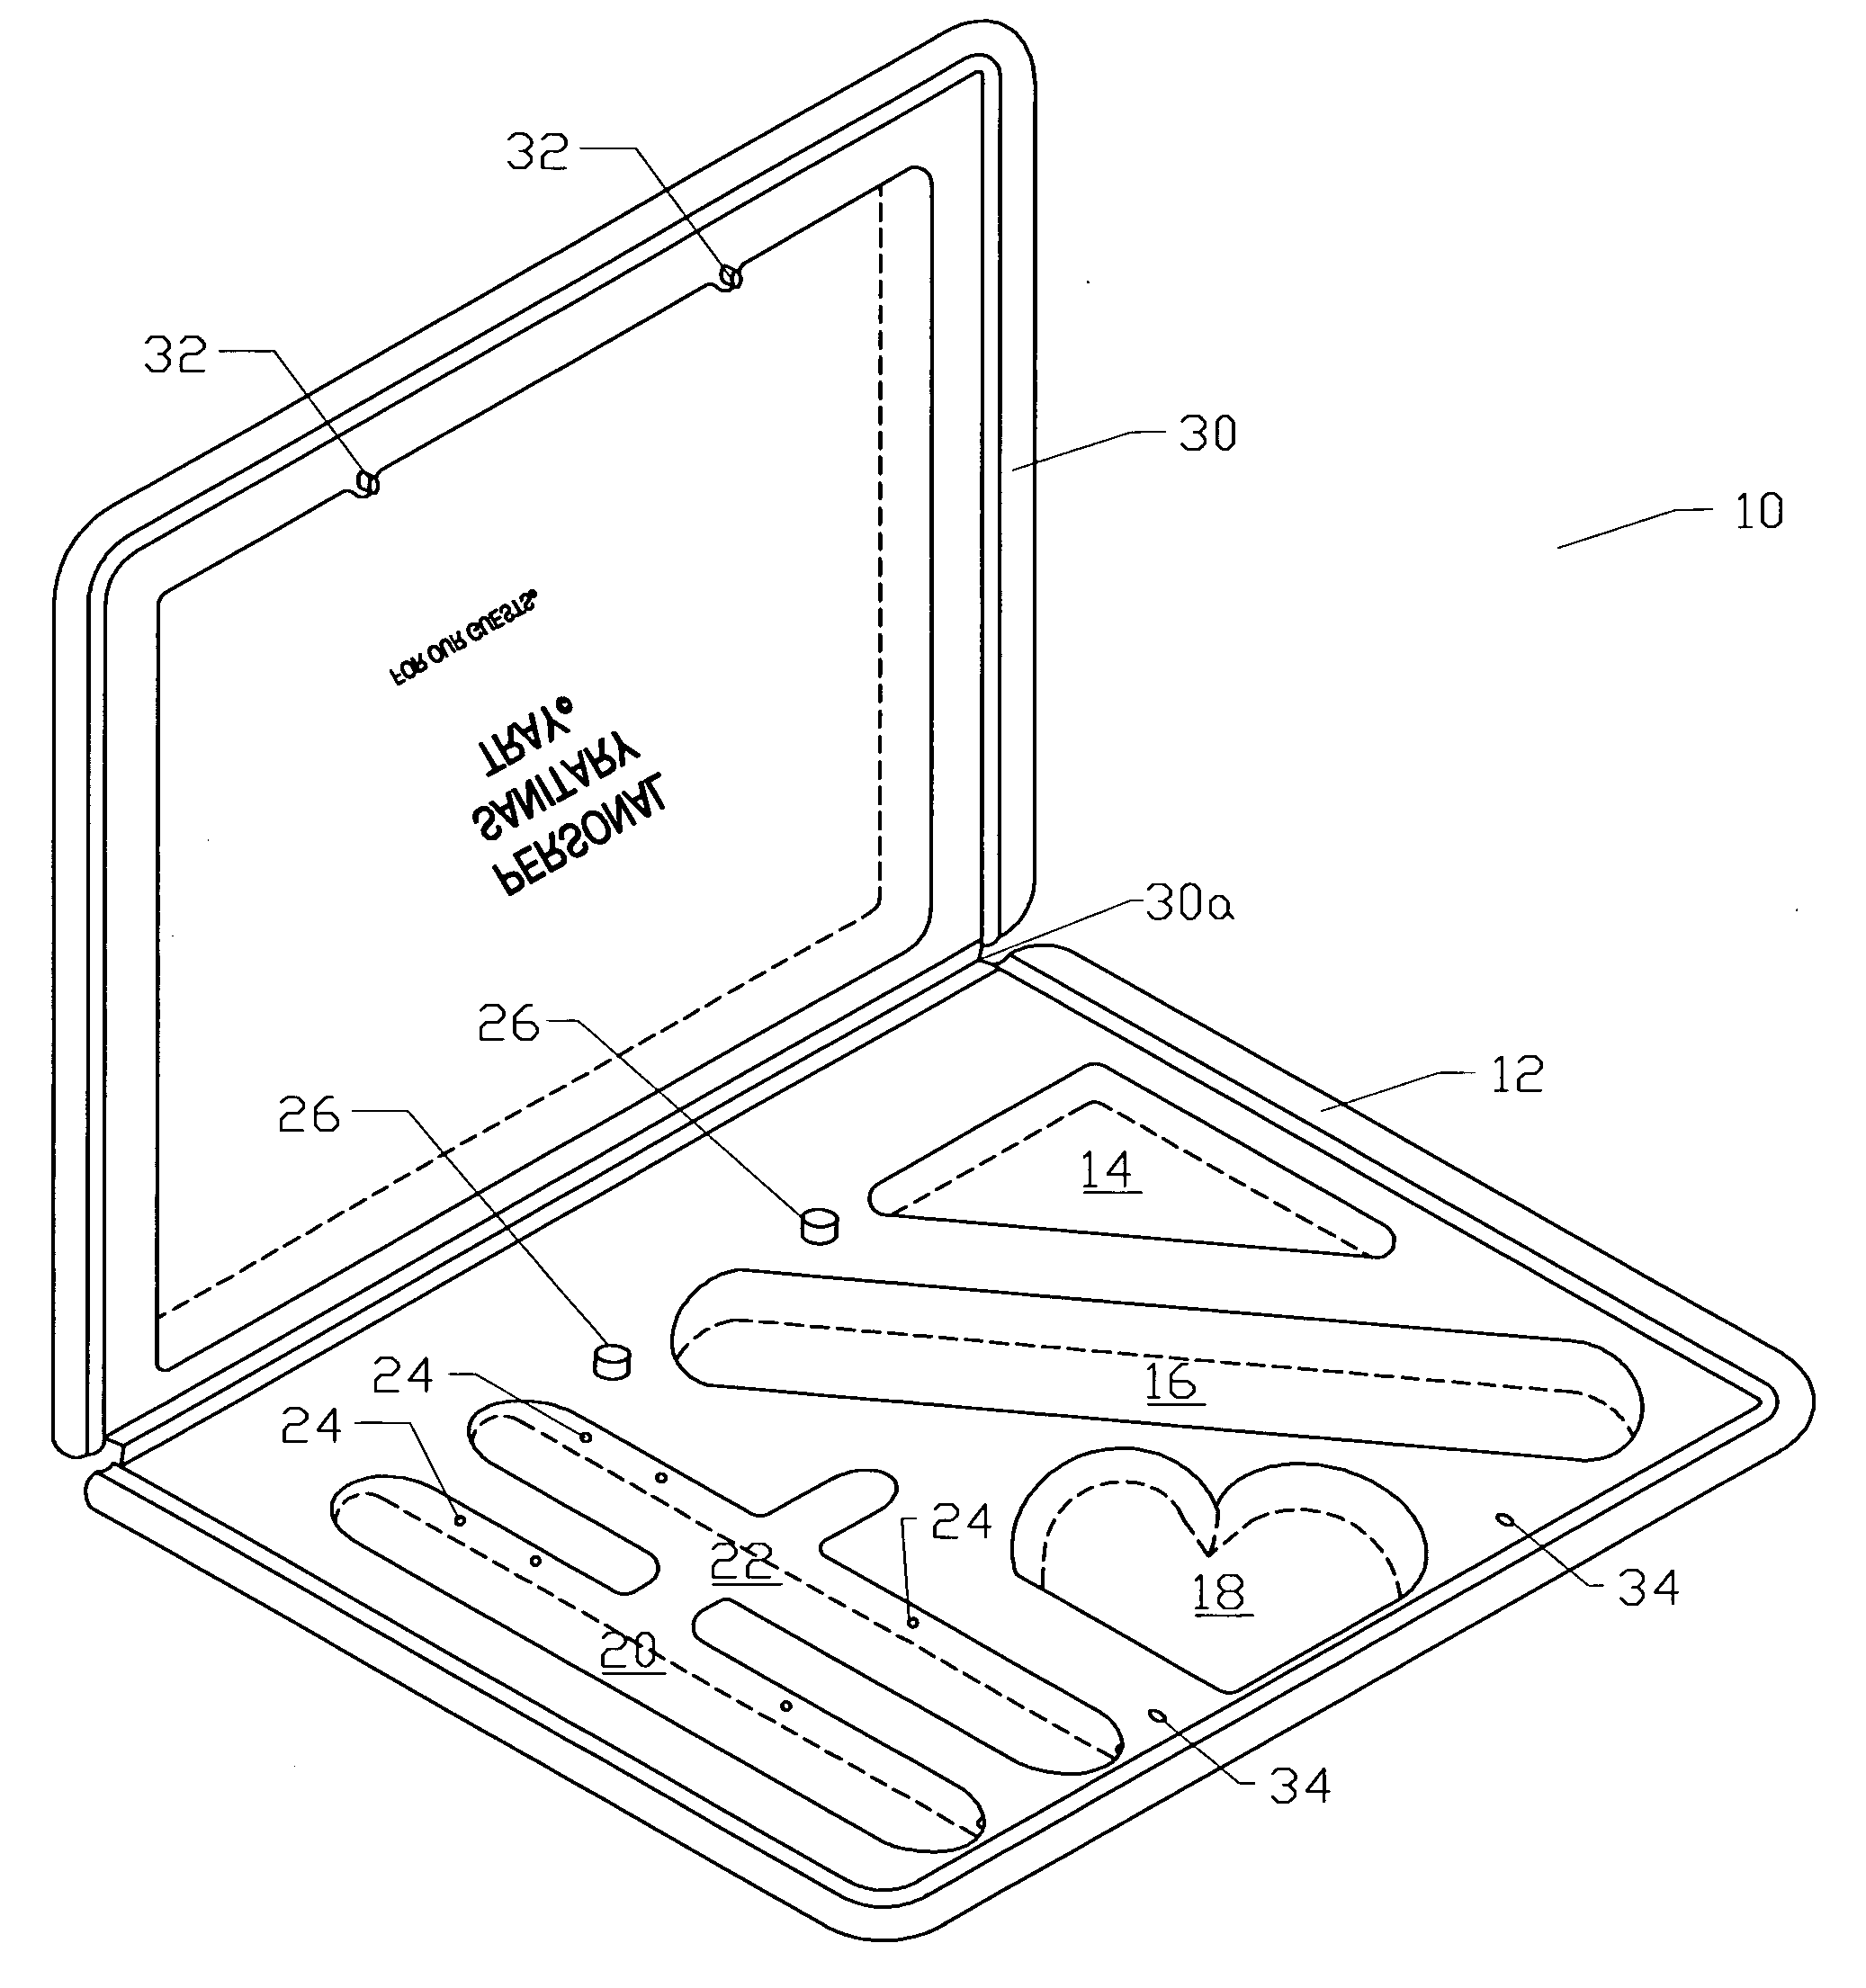 Sanitary tray for personal objects